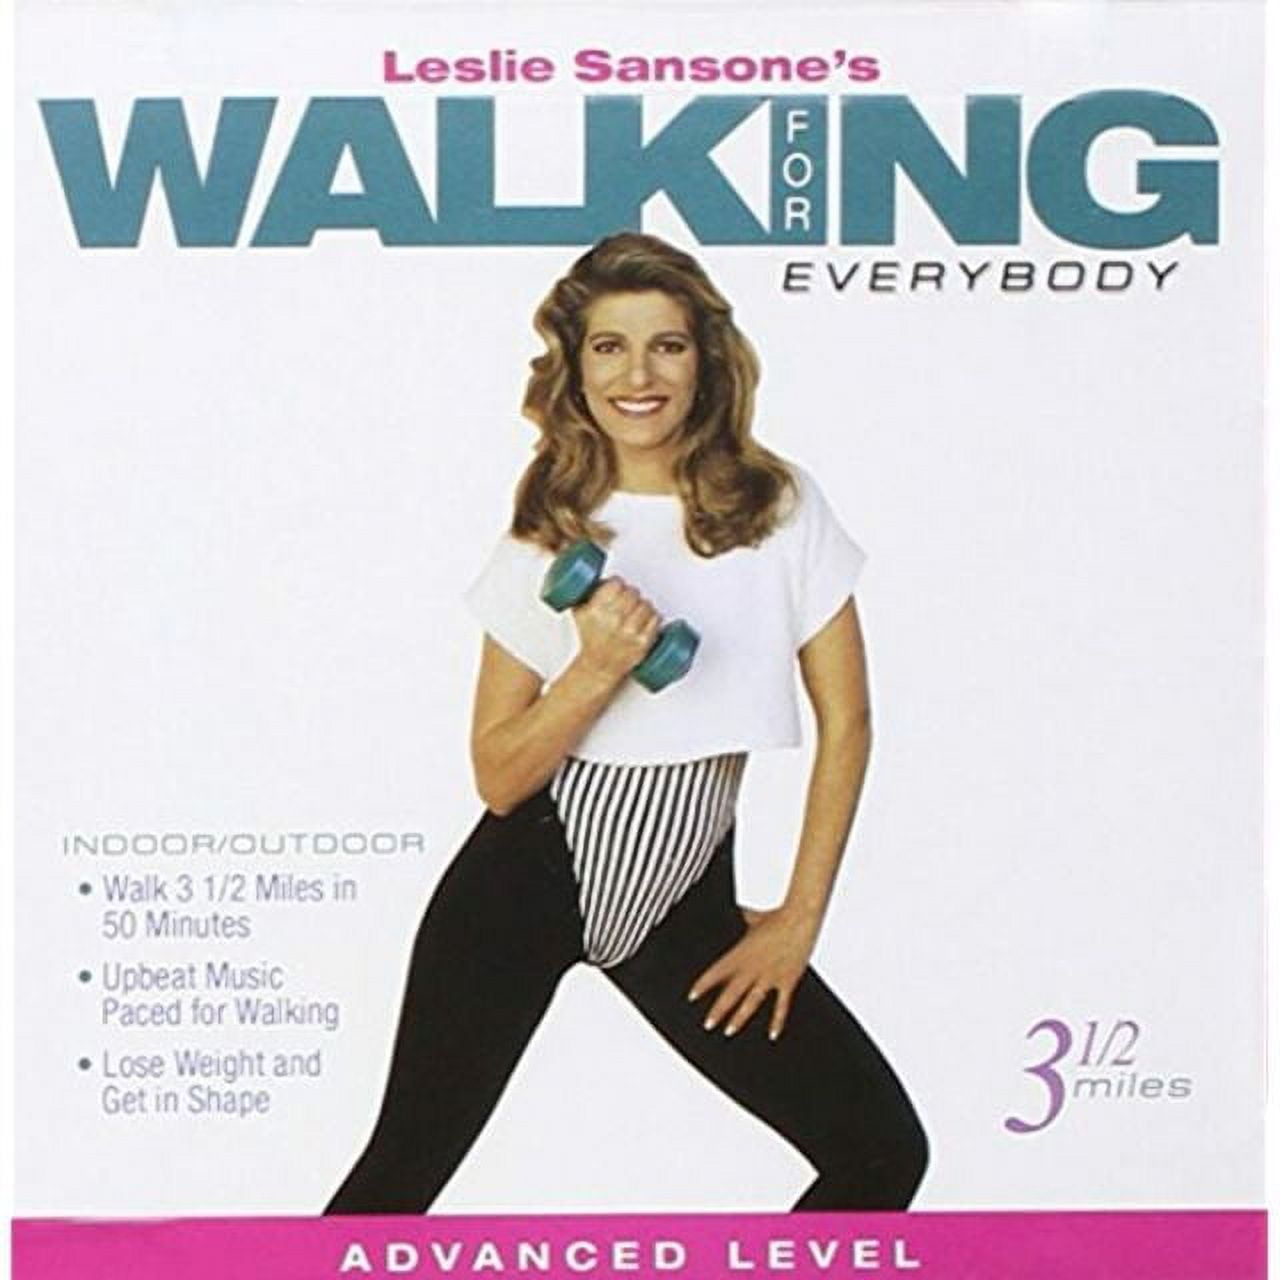 Pre-Owned - Walking for Everybody: Advanced Level by Leslie Sansone (CD, Apr-2004, Power Records (Fitness/Dance))